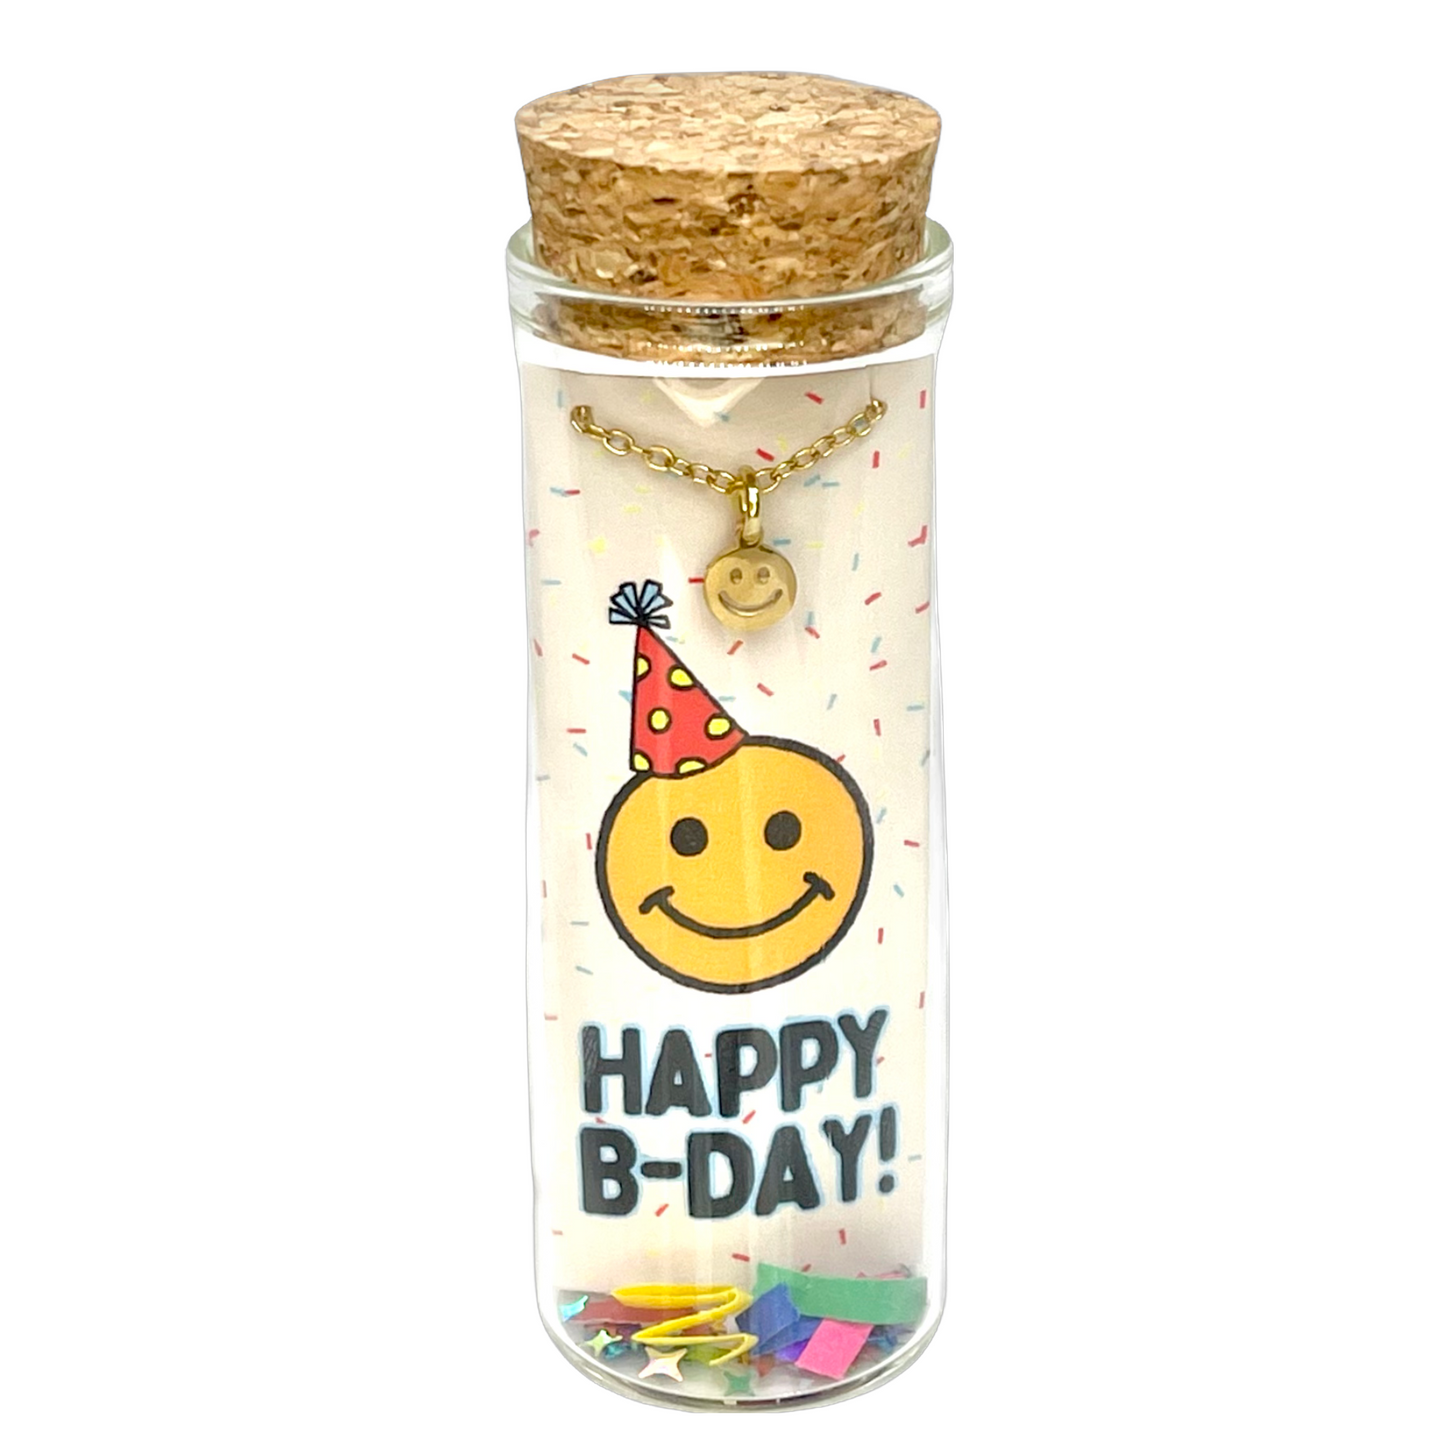 Happy Birthday Smile Face Gold Charm Necklace